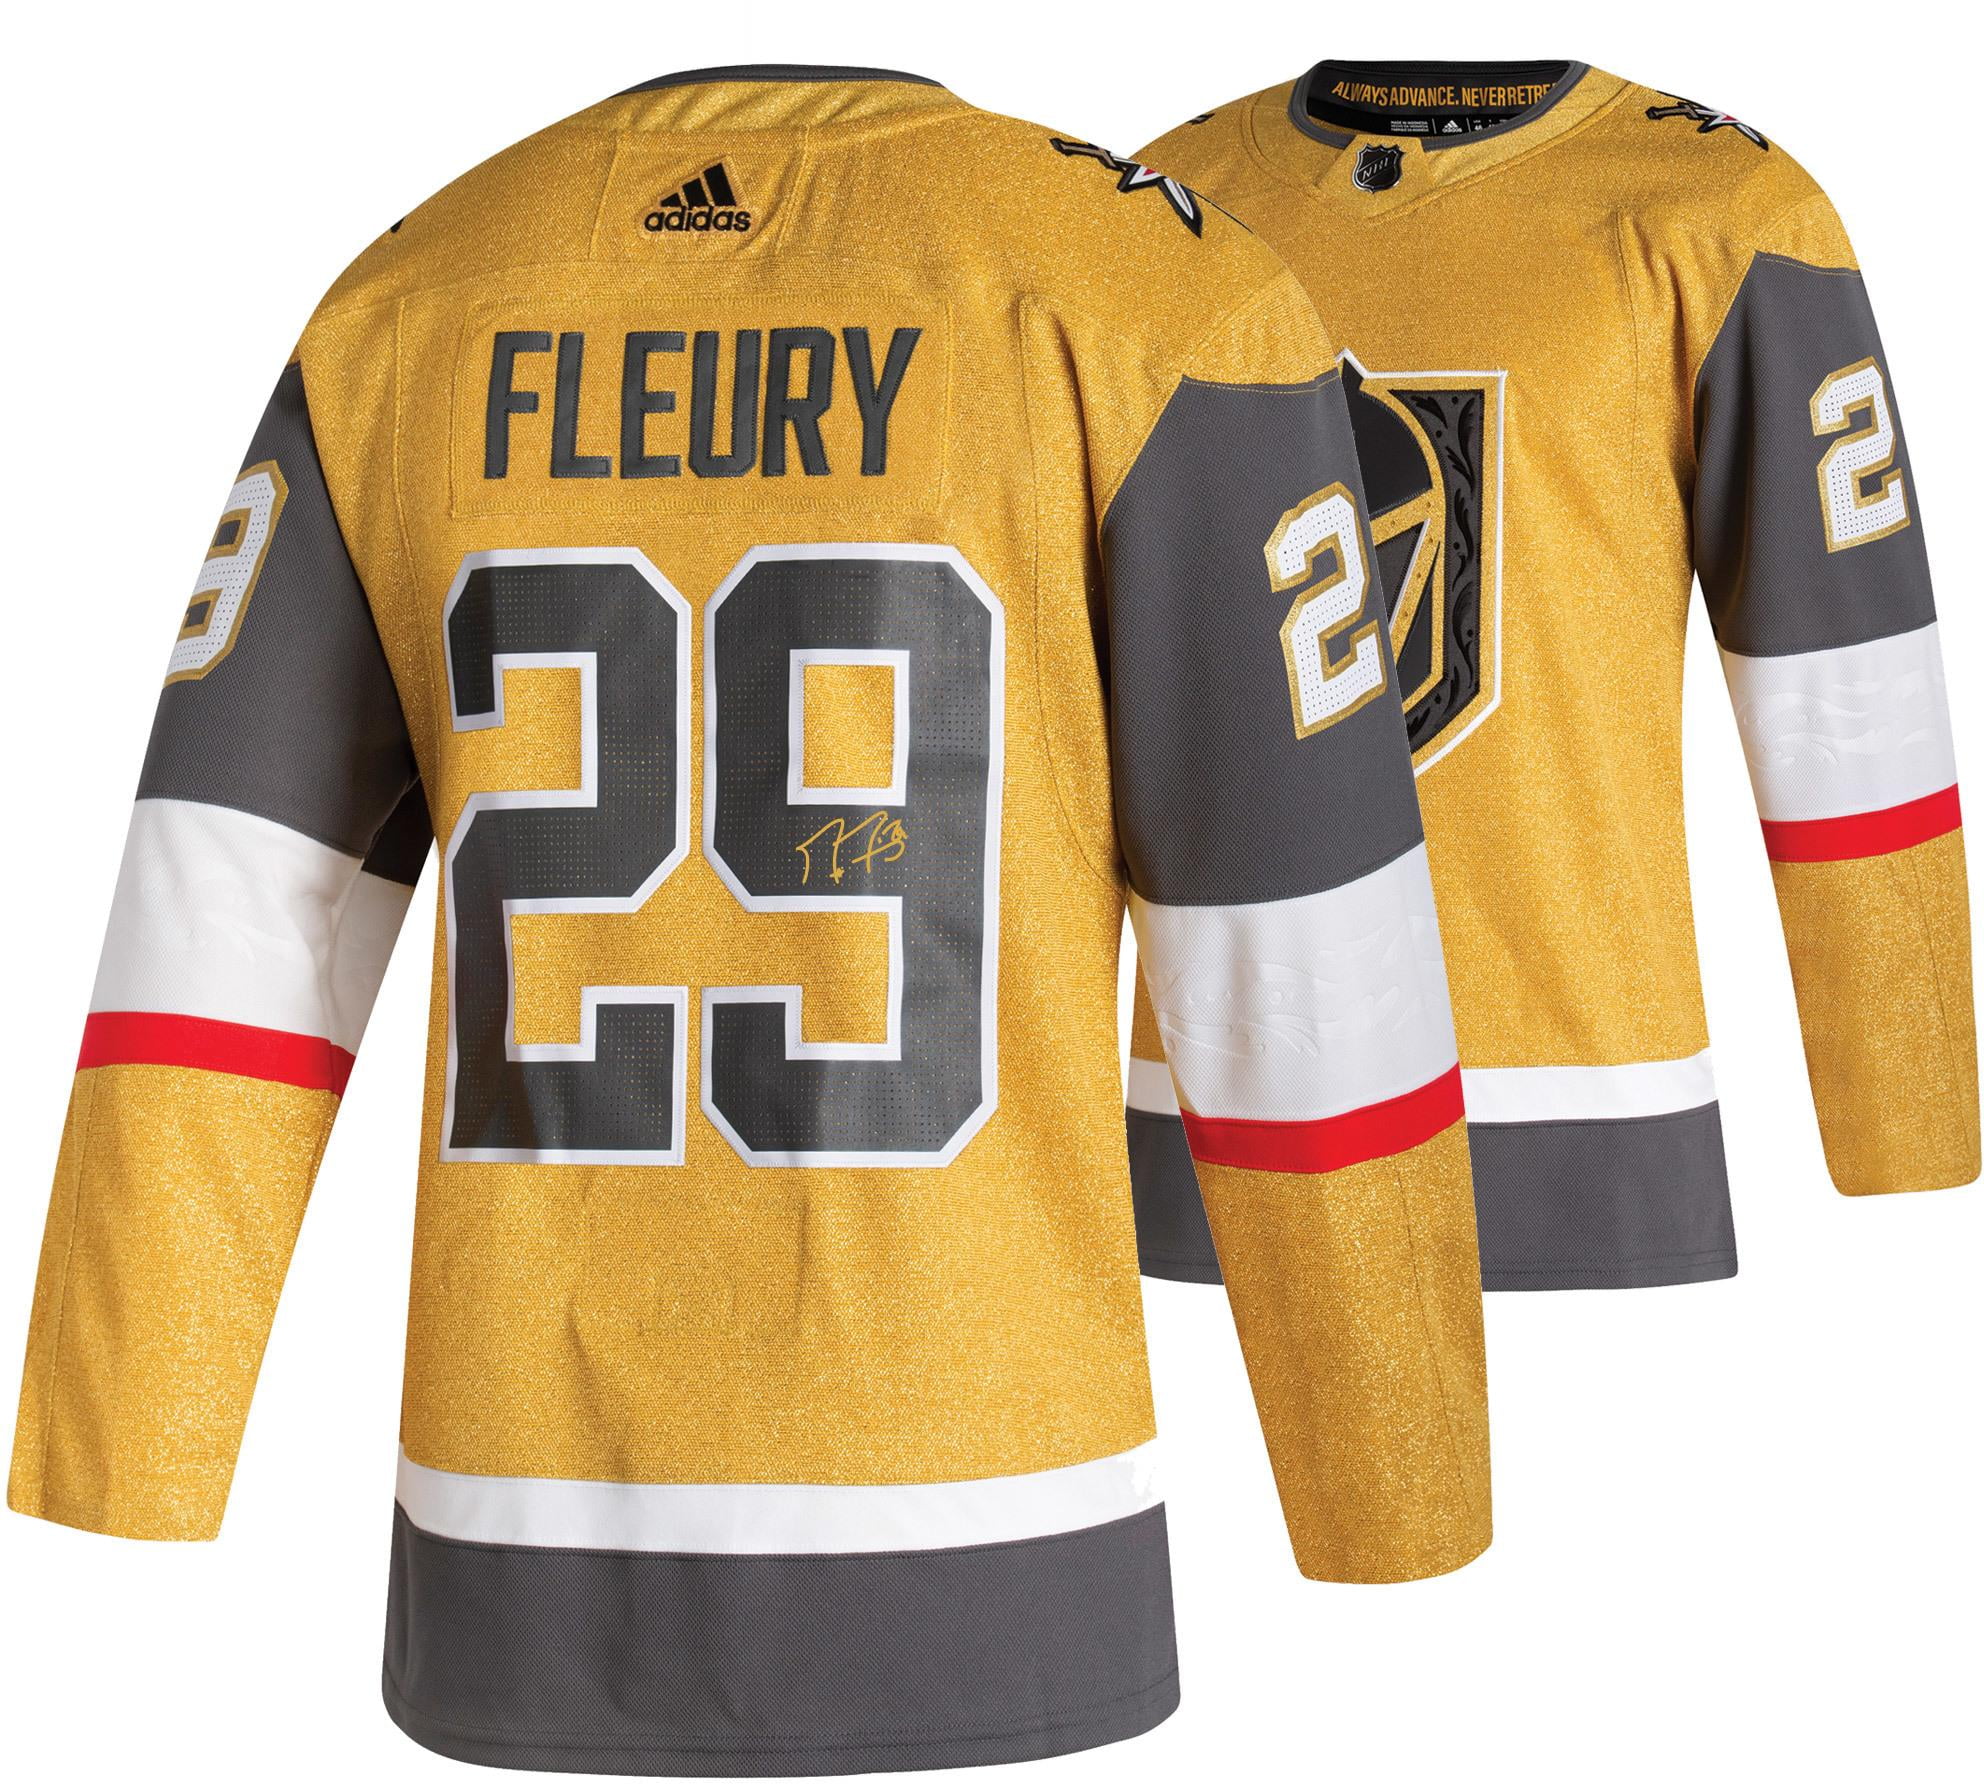 signed fleury jersey